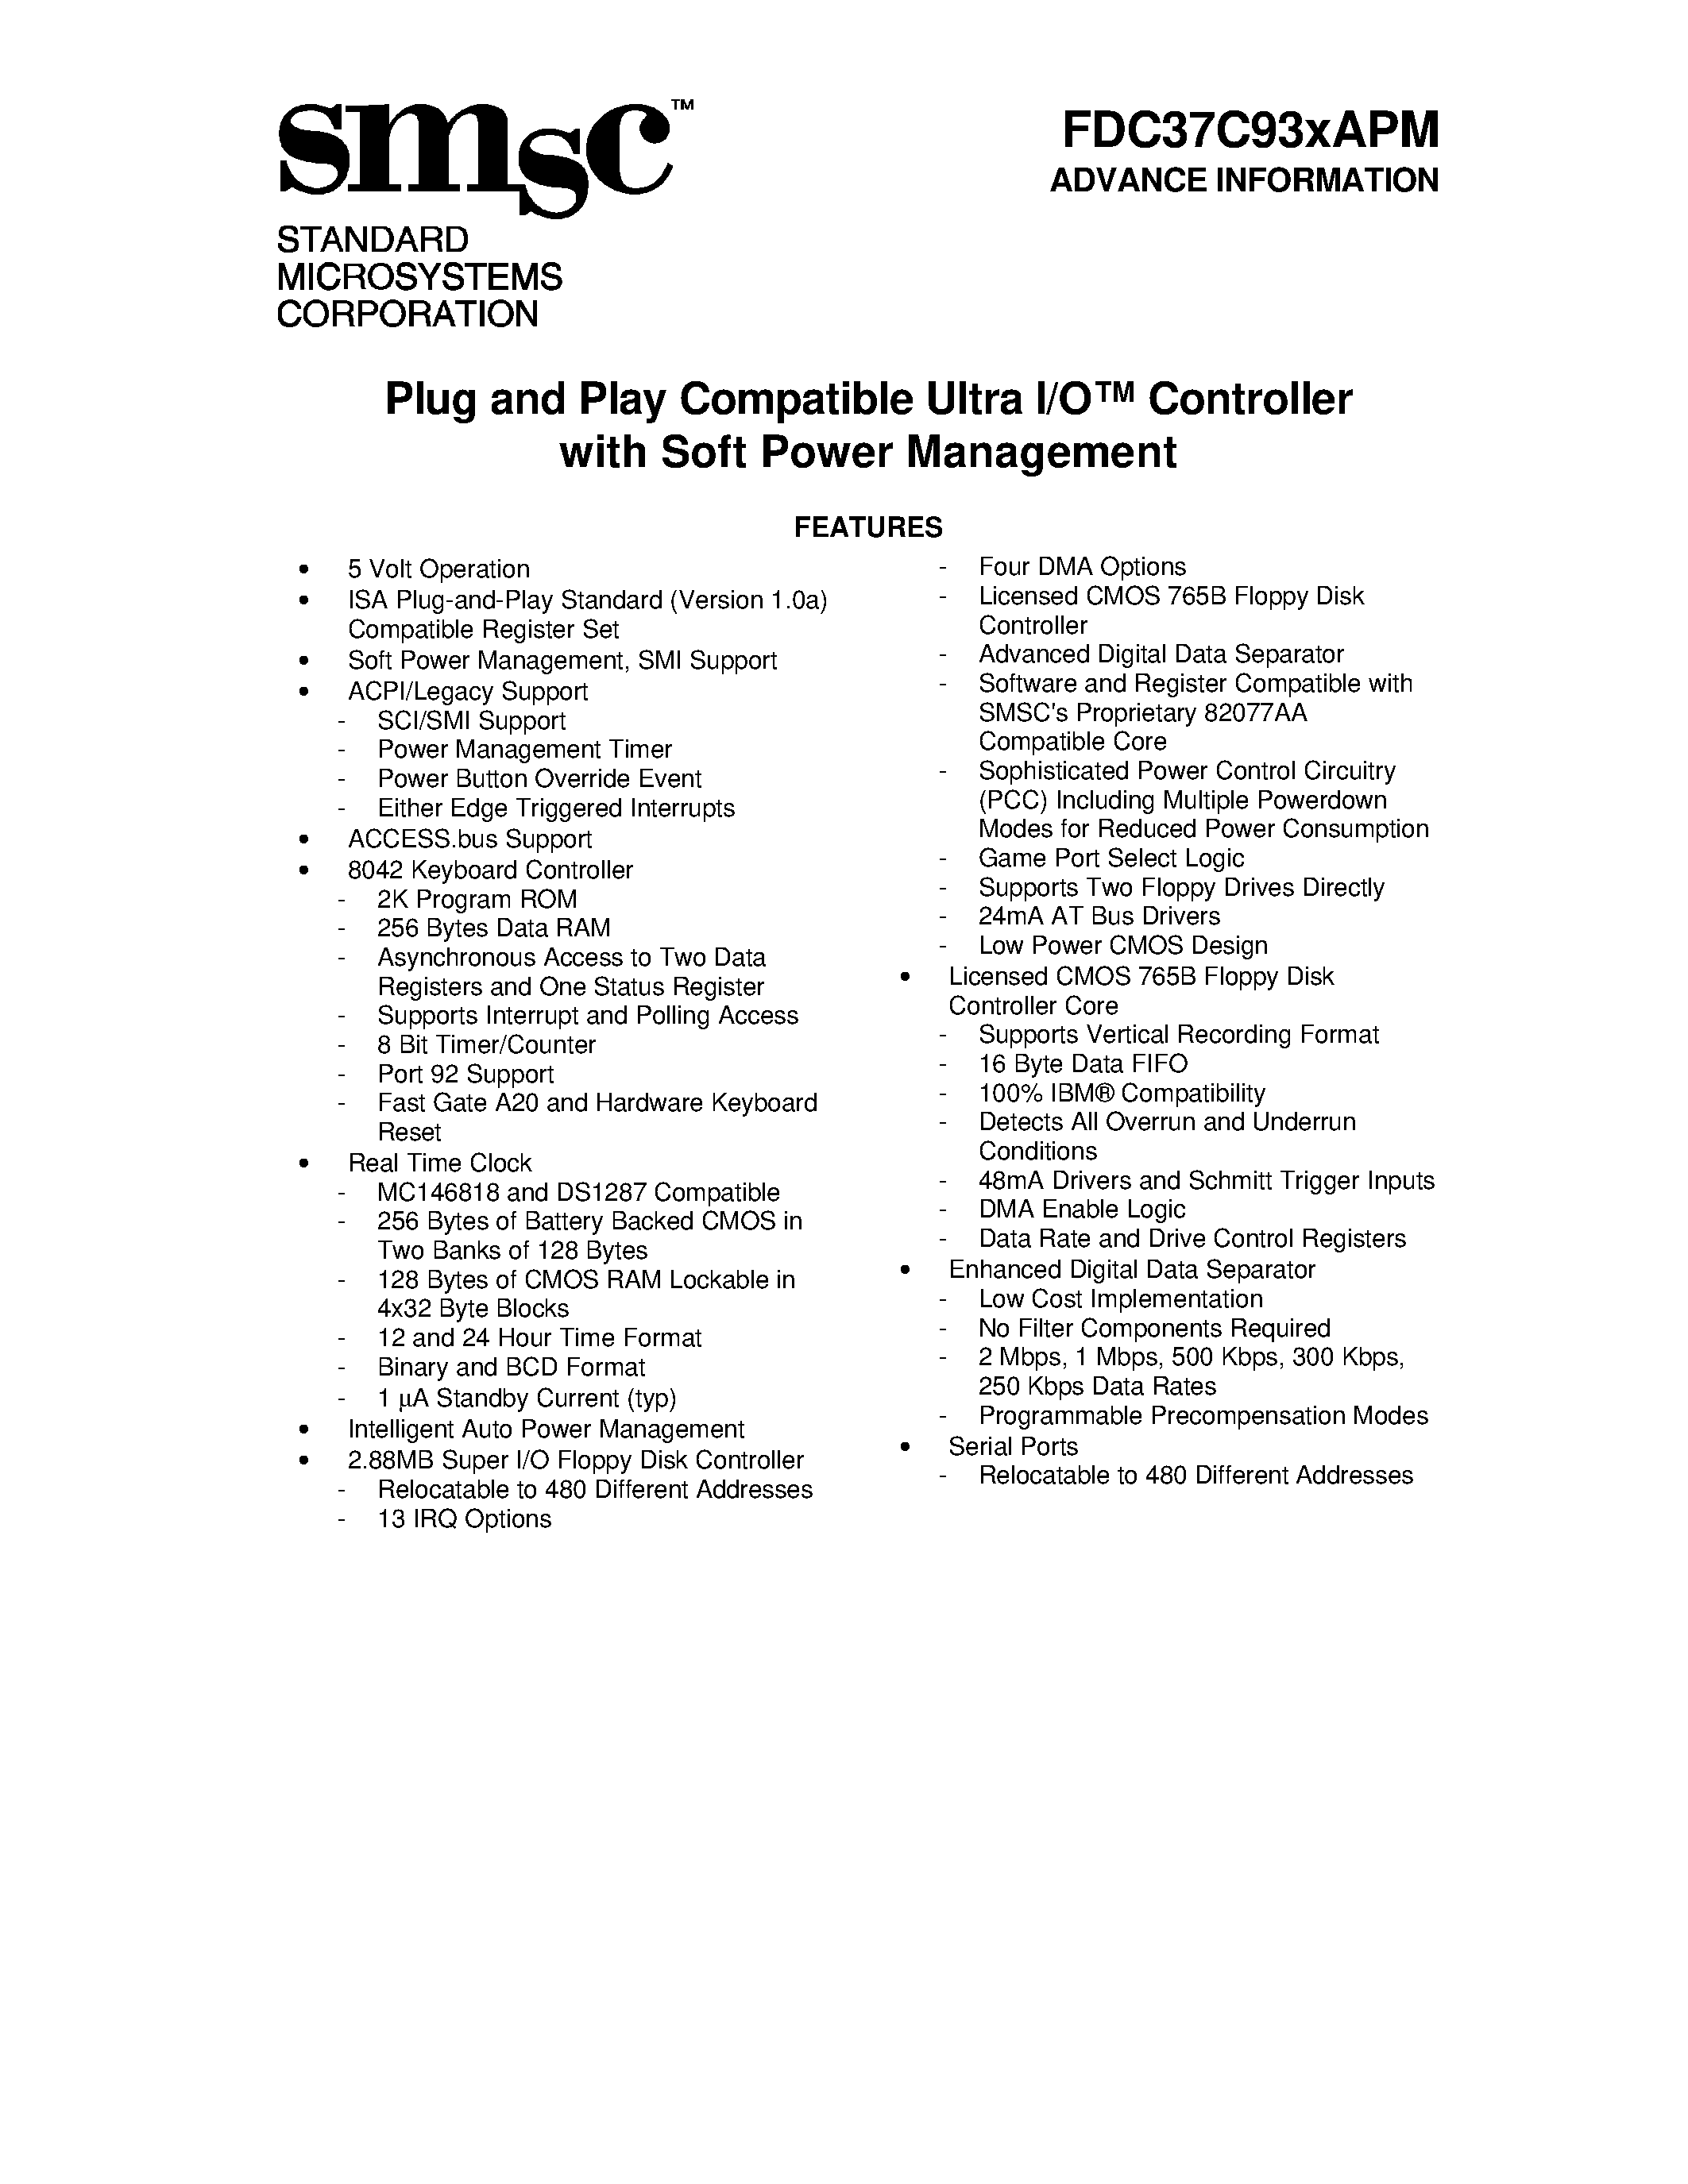 Datasheet FDC37C93 - Plug and Play Compatible Ultra I/O Controller with Soft Power Management page 1